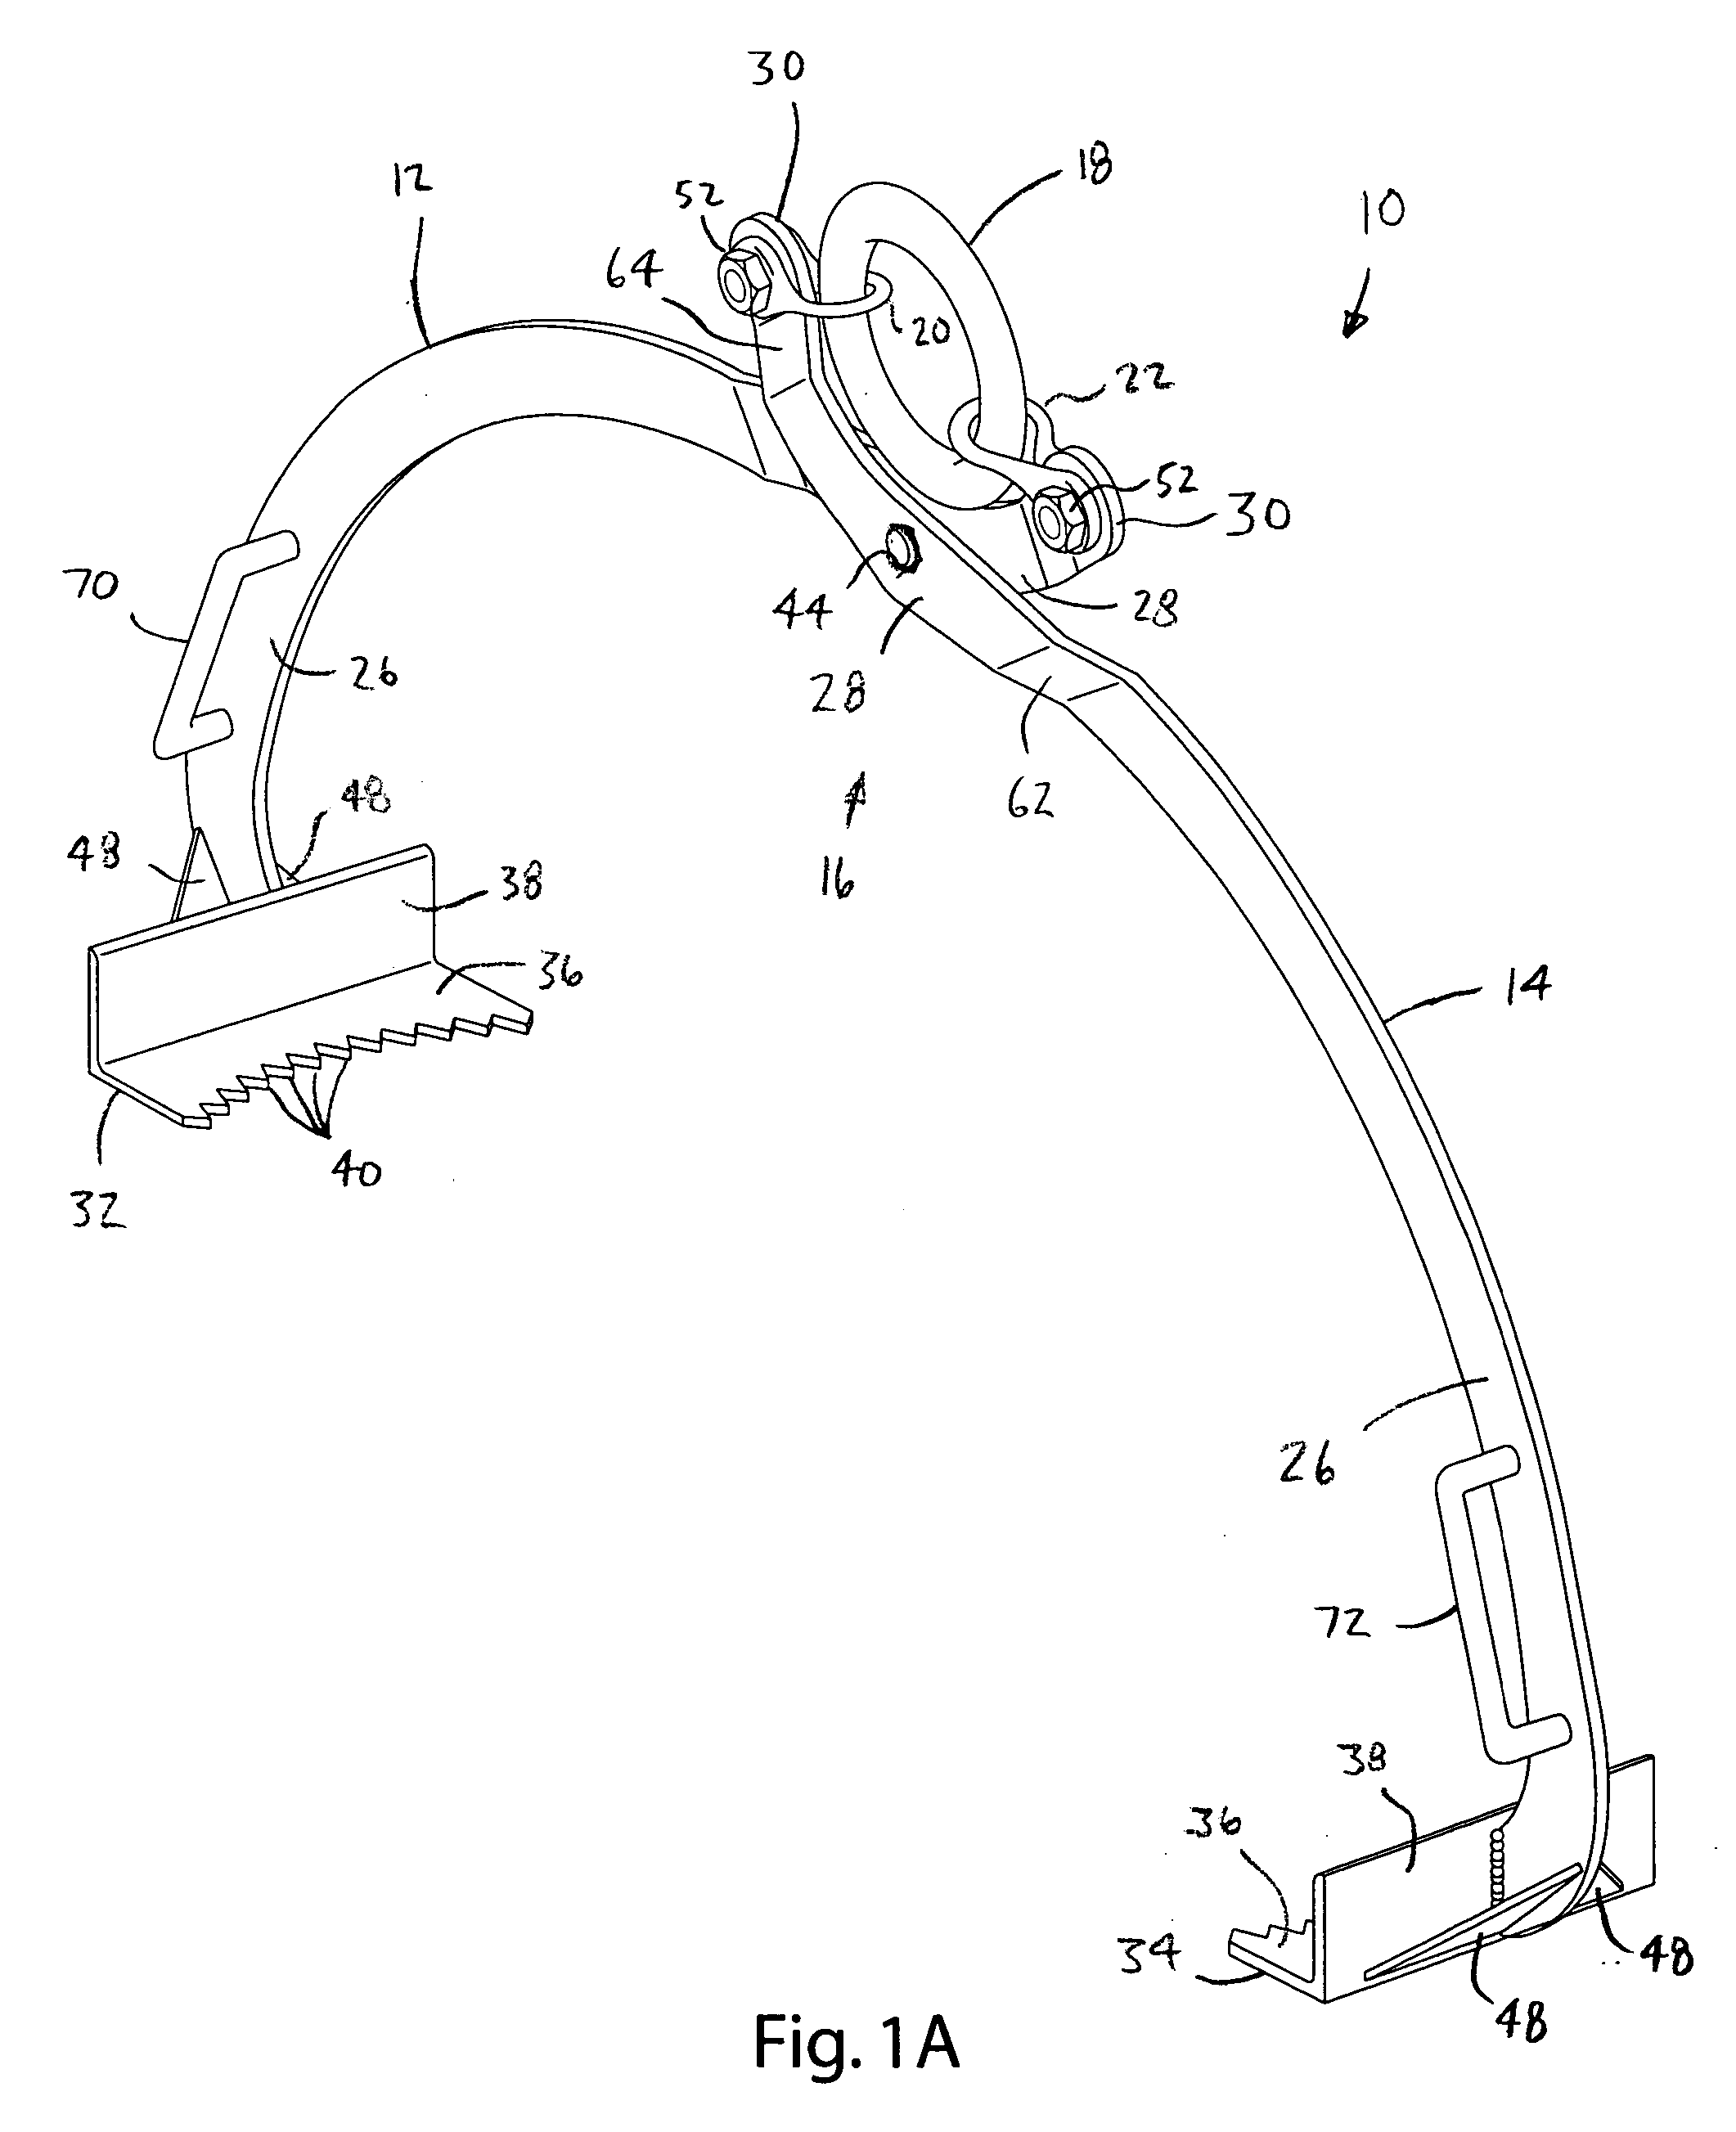 Apparatus for manipulating landscaping and other similar materials